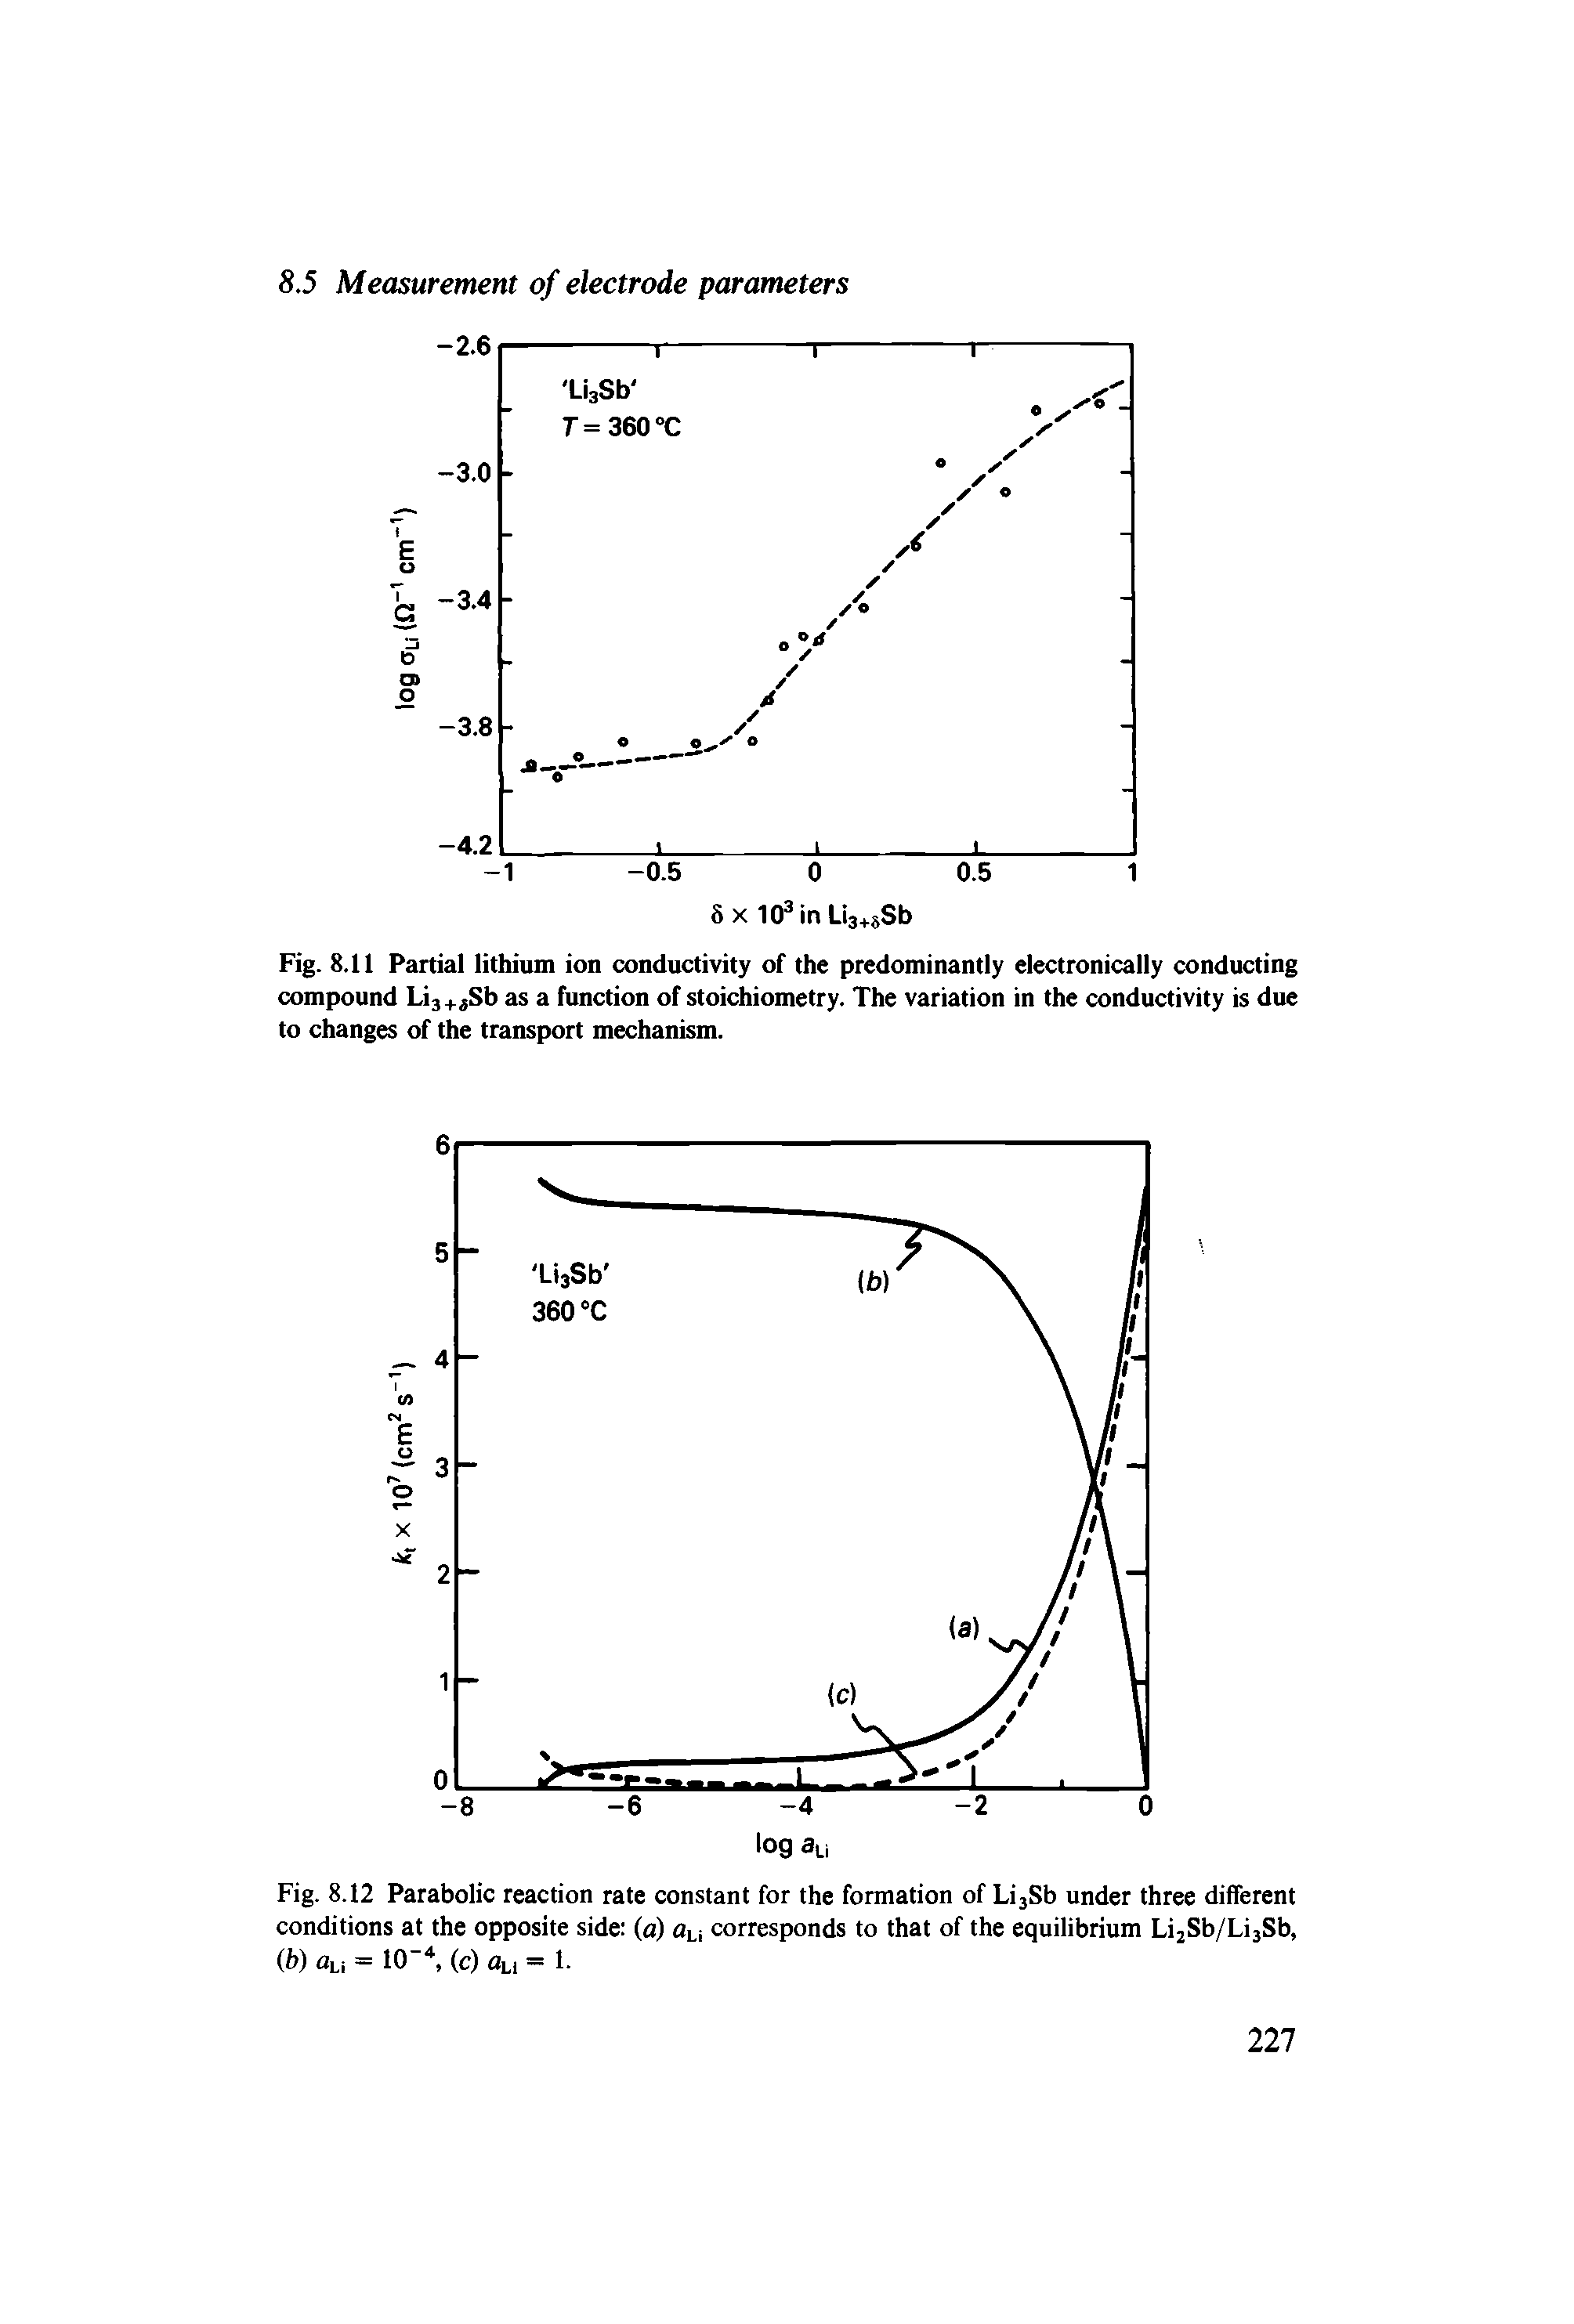 Fig. 8.11 Partial lithium ion conductivity of the predominantly electronically conducting compound Lij+jSb as a function of stoichiometry. The variation in the conductivity is due to changes of the transport mechanism.